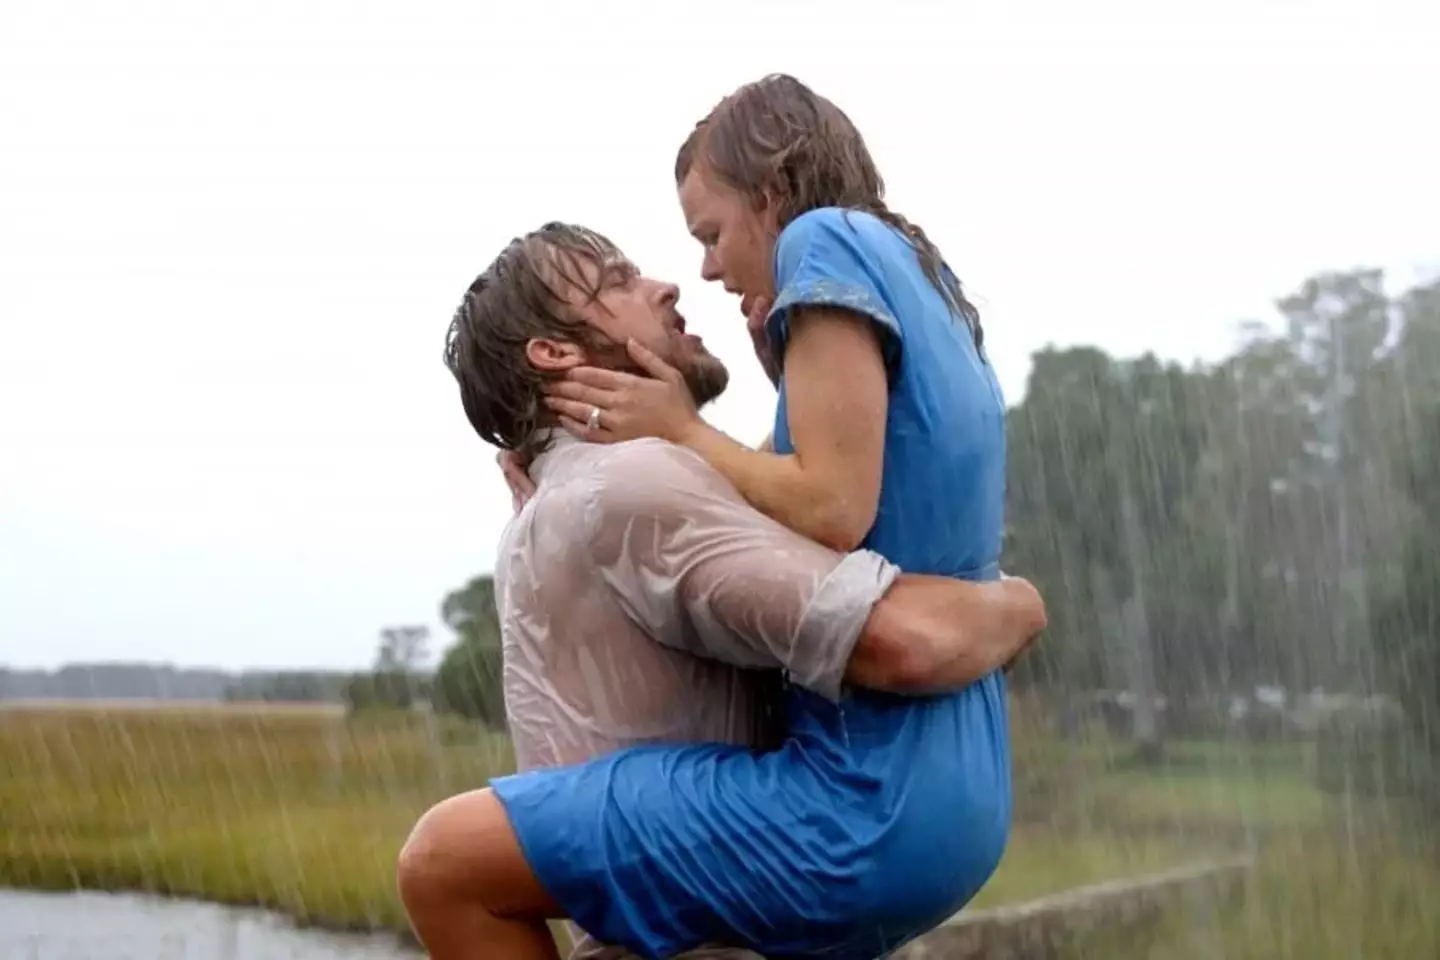 Other romantic films have also had their ending changed, just like The Notebook.